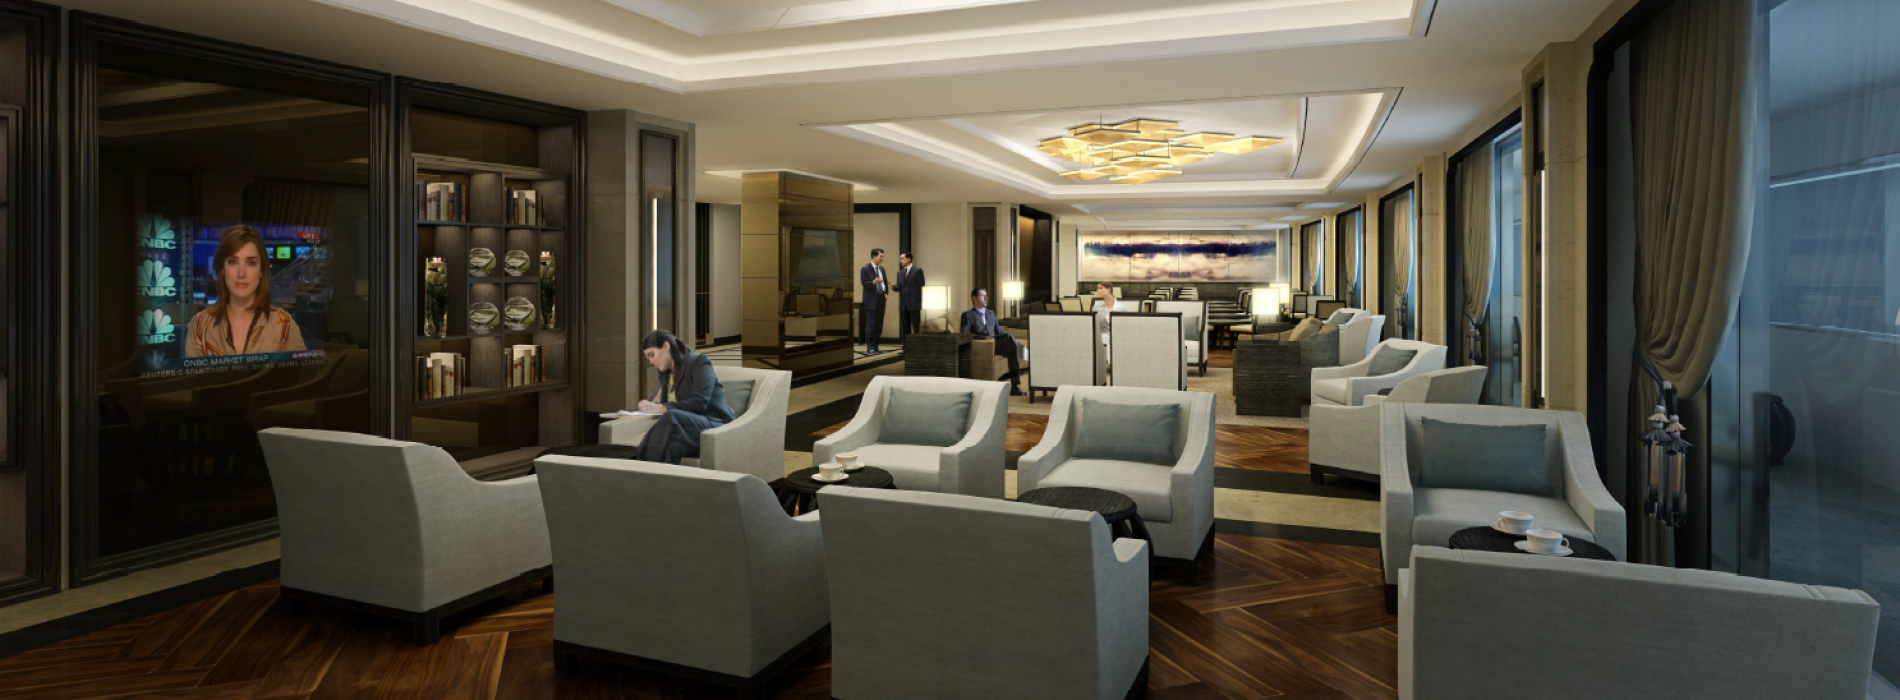 Radisson to launch two new hotels in Wuhan, China